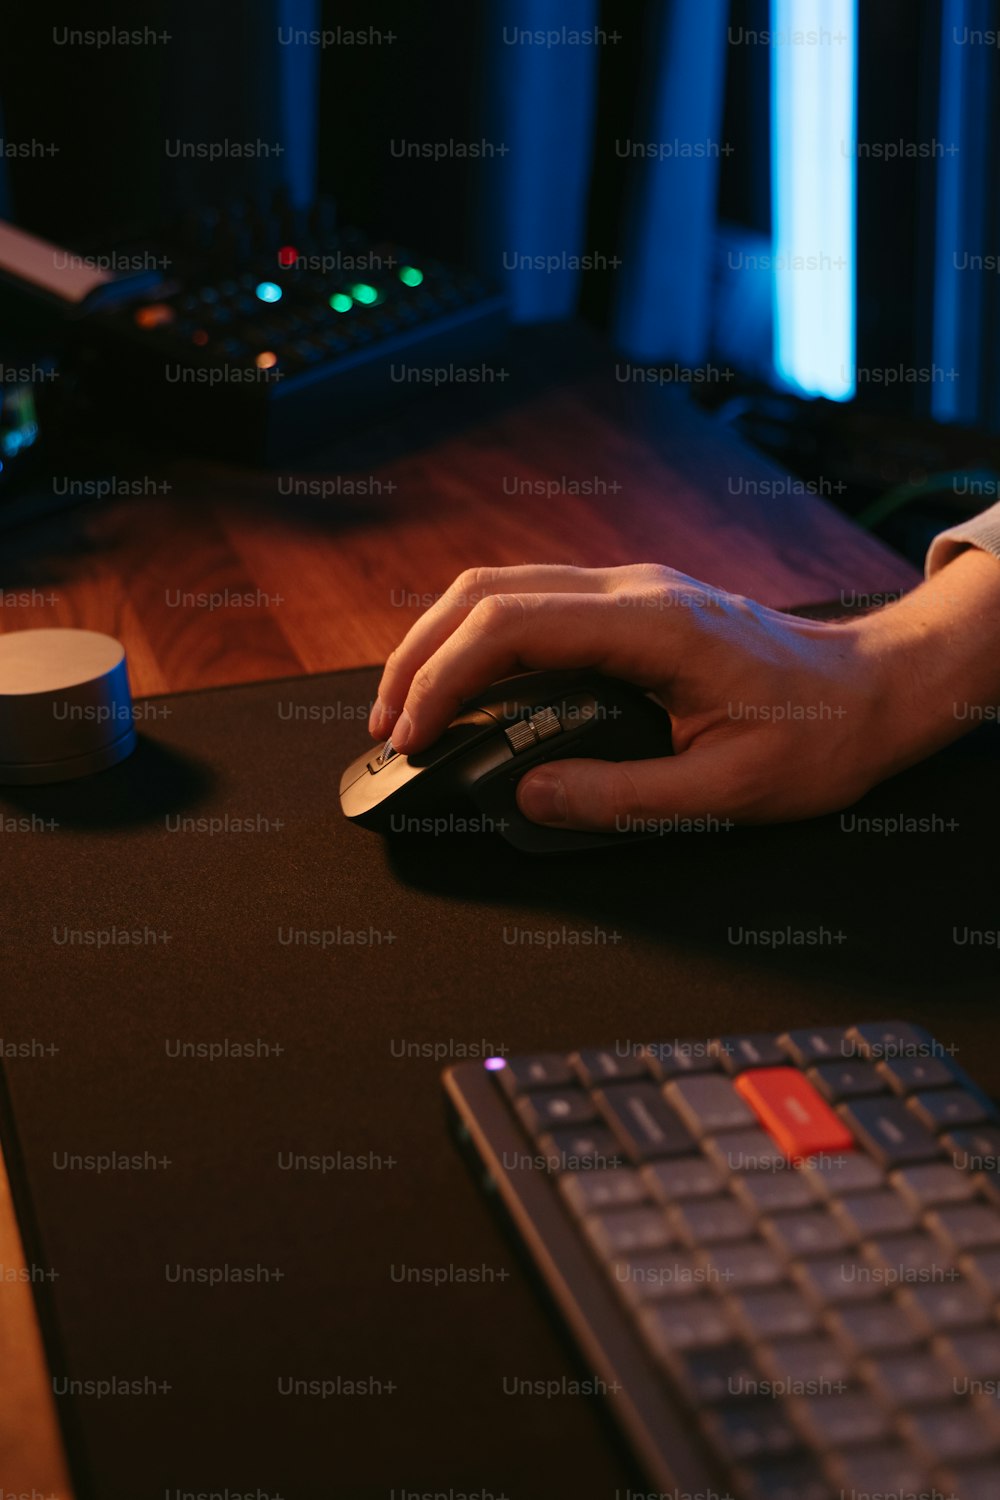 a person's hand on a mouse on a desk